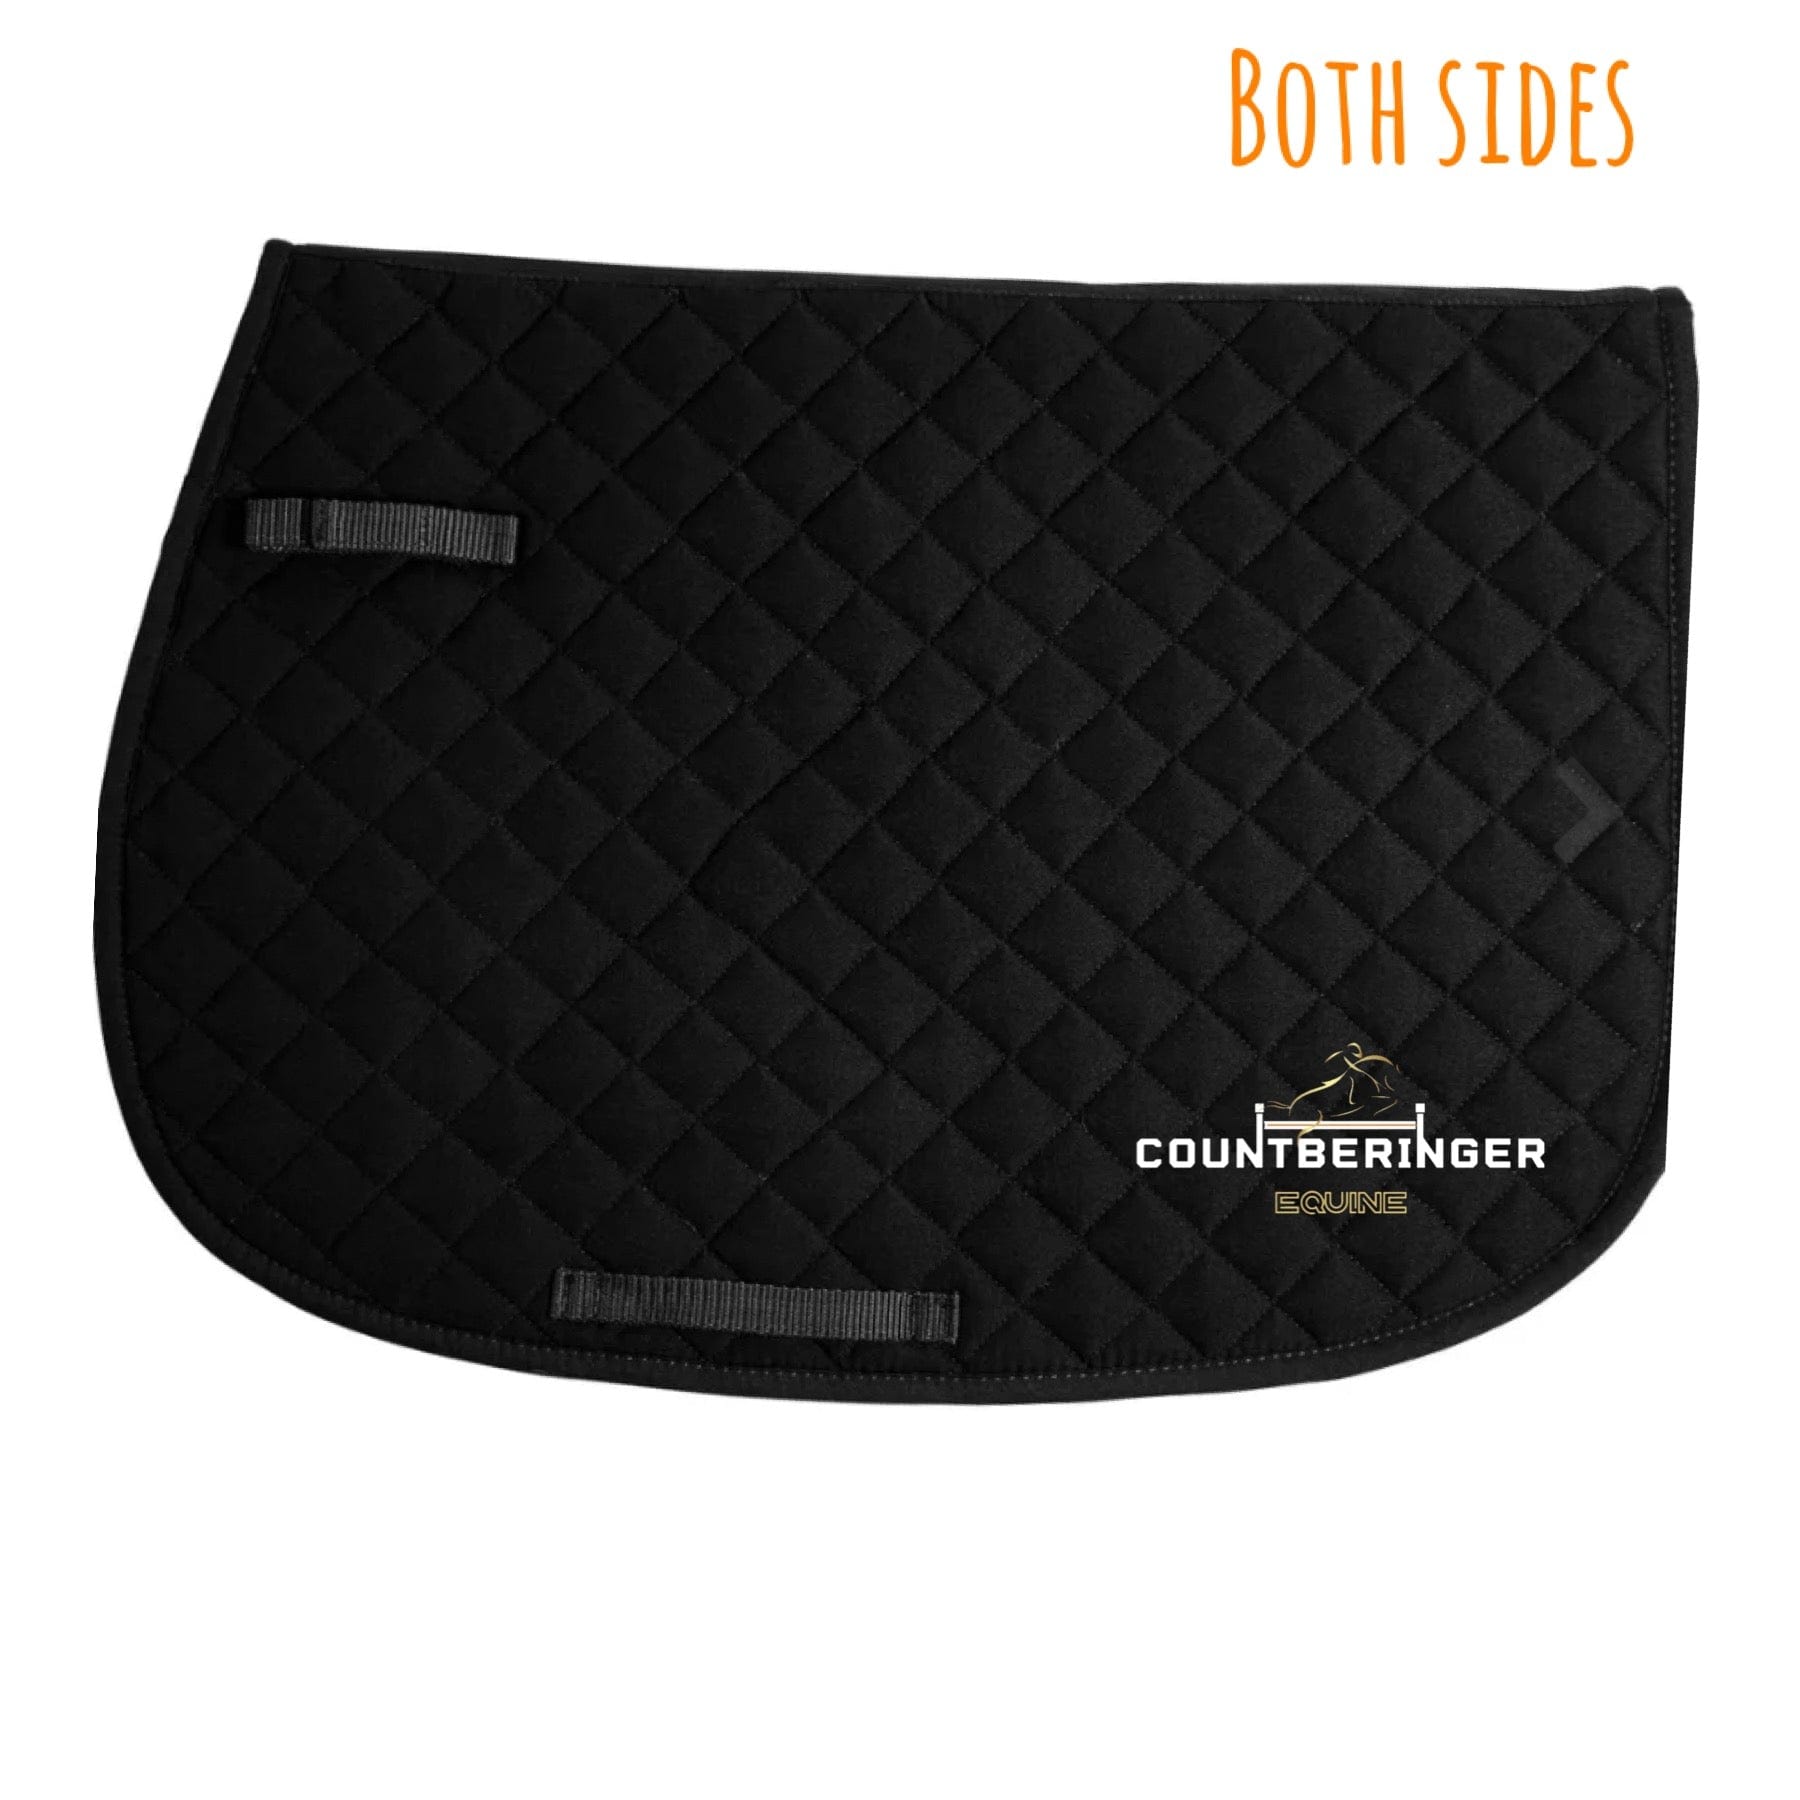 Equestrian Team Apparel Countberinger Equine Saddle Pad equestrian team apparel online tack store mobile tack store custom farm apparel custom show stable clothing equestrian lifestyle horse show clothing riding clothes horses equestrian tack store